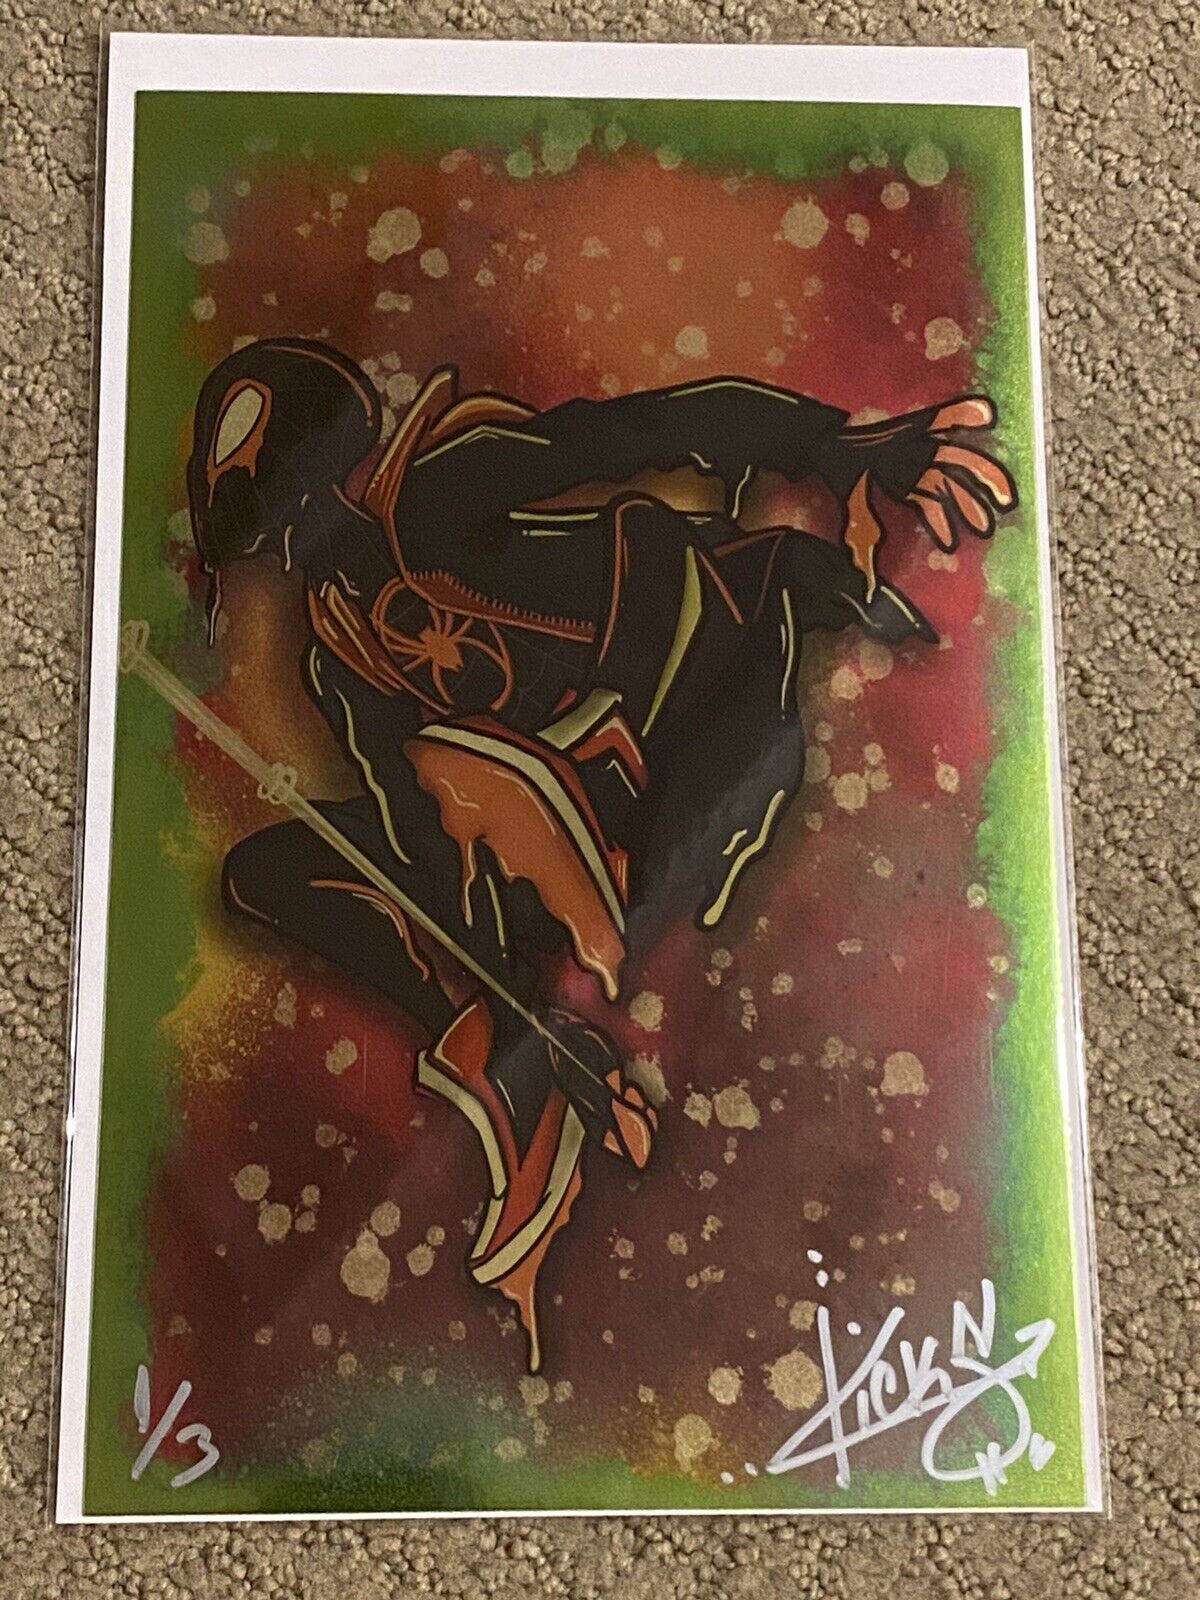 Miles Morales GOLD Limited Kickstradomis Signed Print (only 3 created) #1